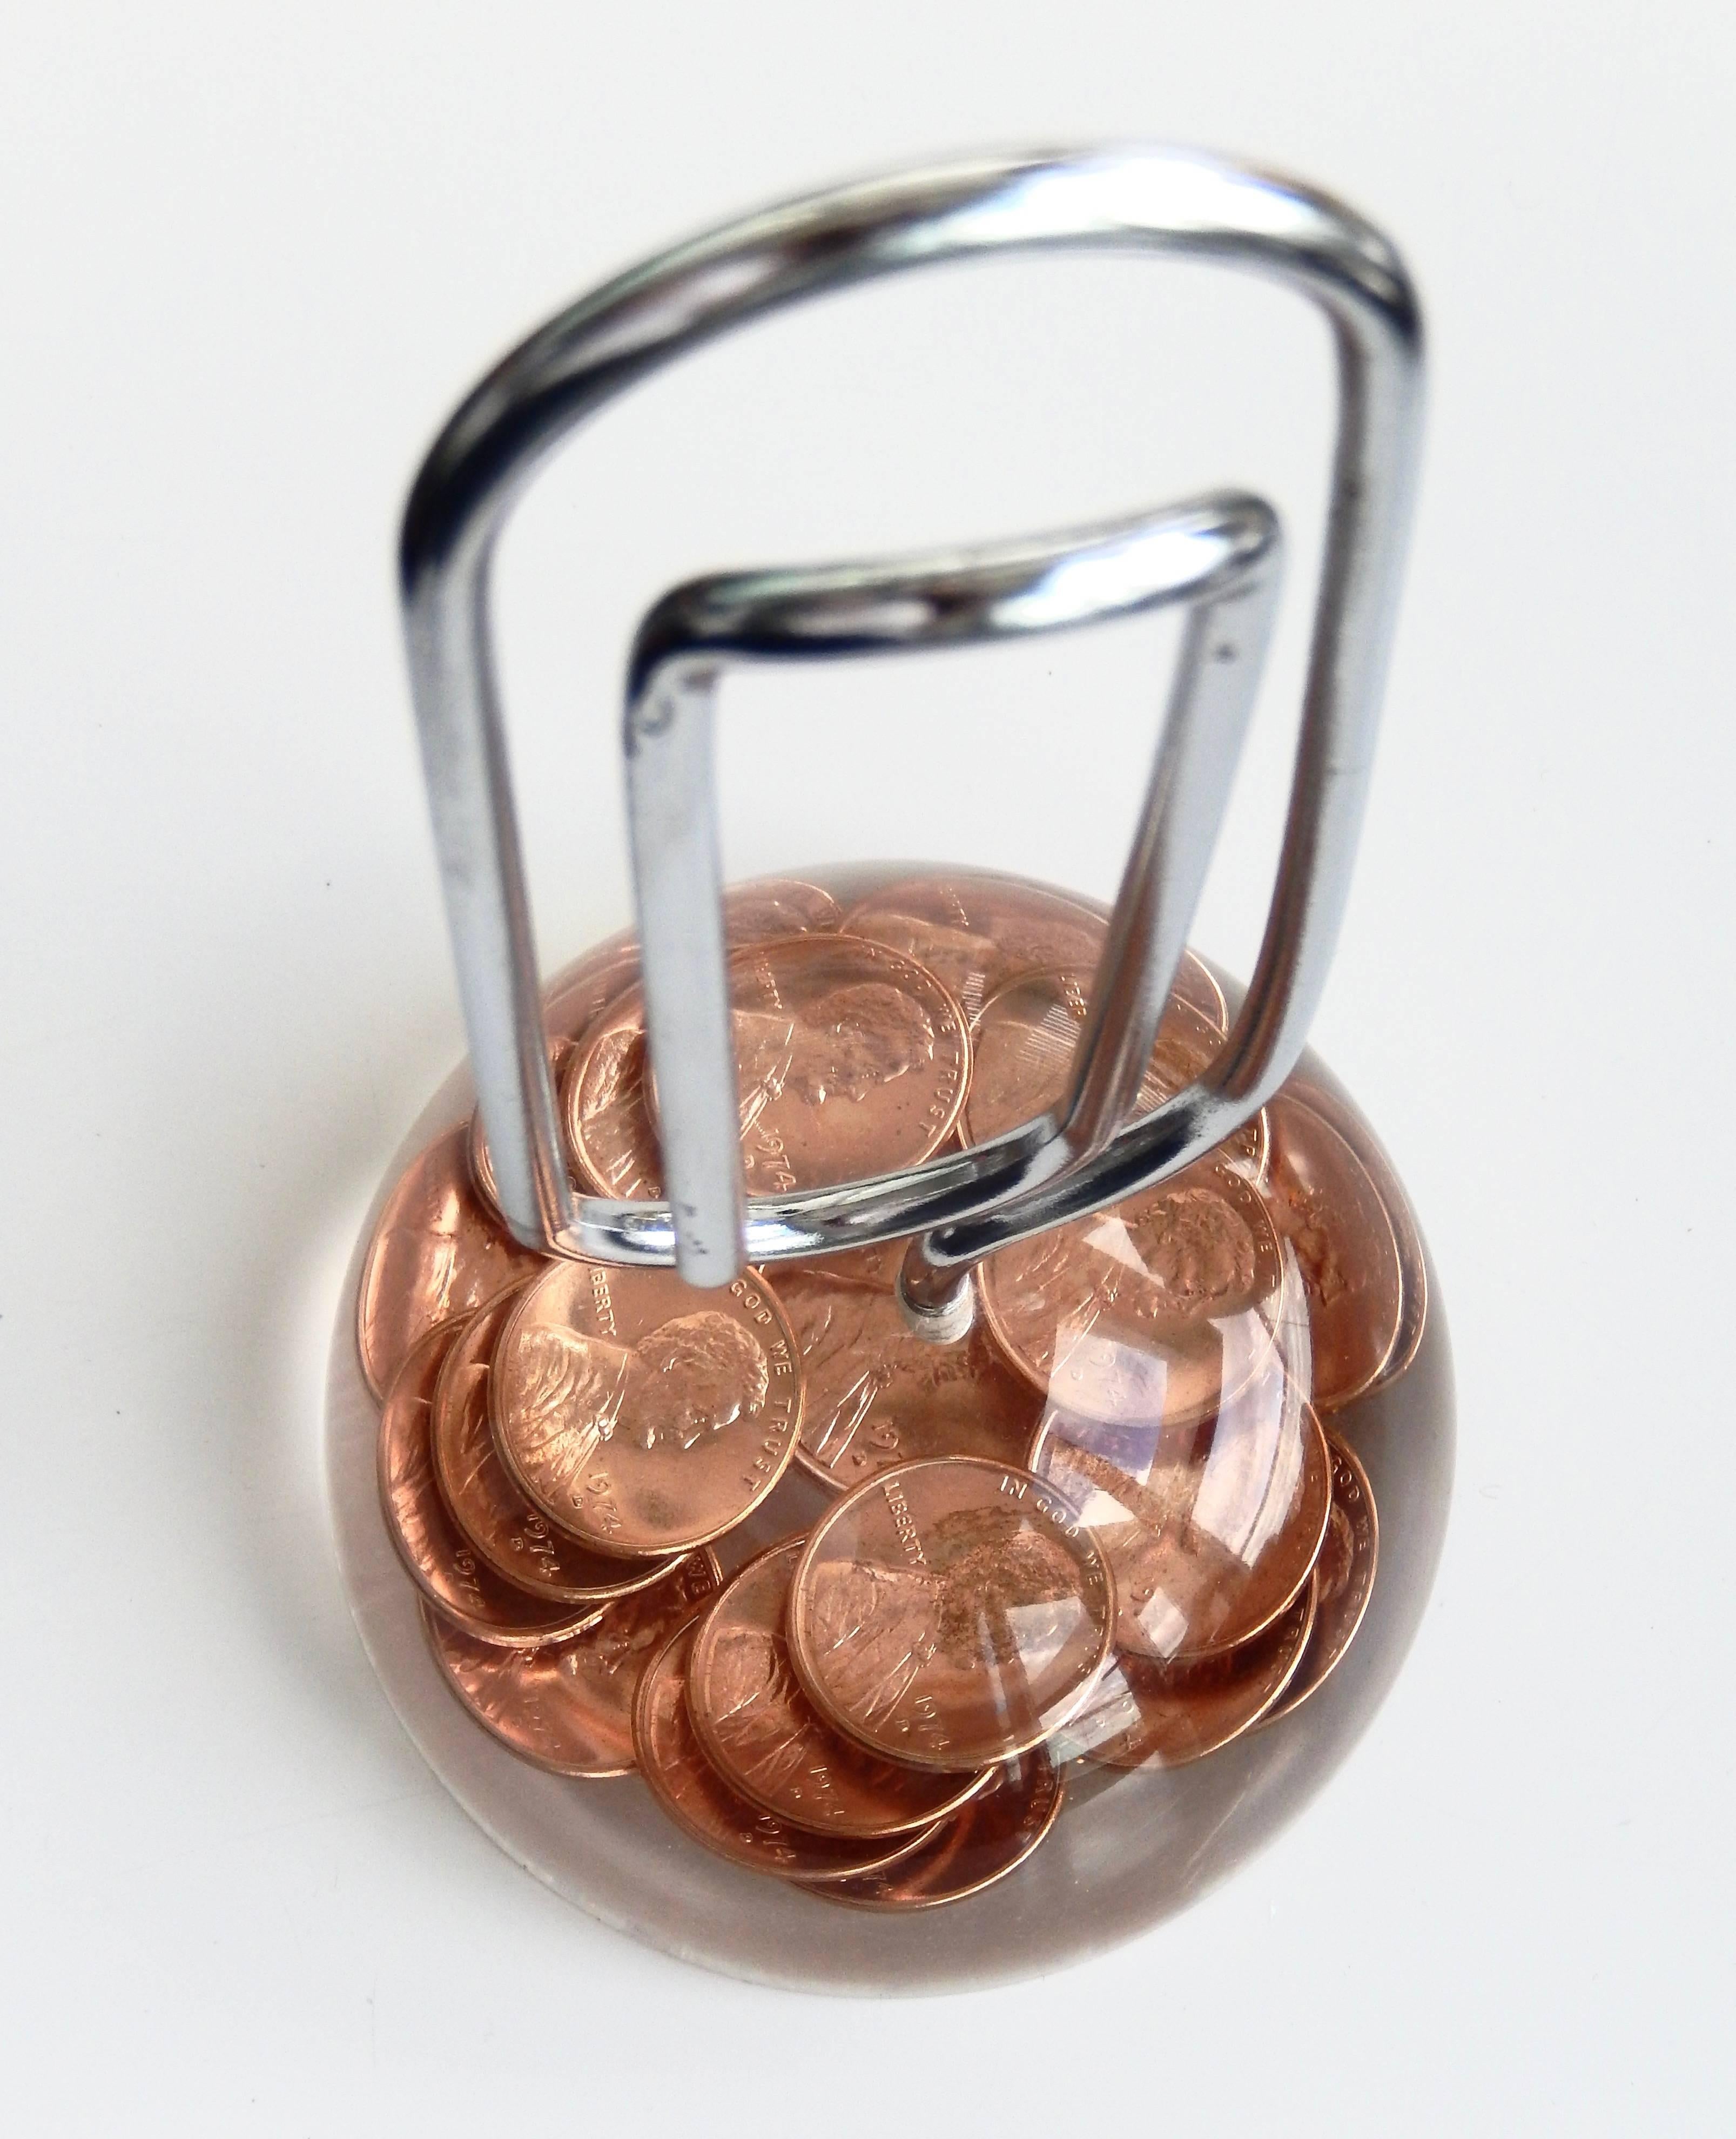 A large vertical paper clip embedded in a  domed lucite base displaying a design of 1974 copper pennies. Could it be commemorating the resignation of President Nixon? An interesting, well- made and functional desk accessory.